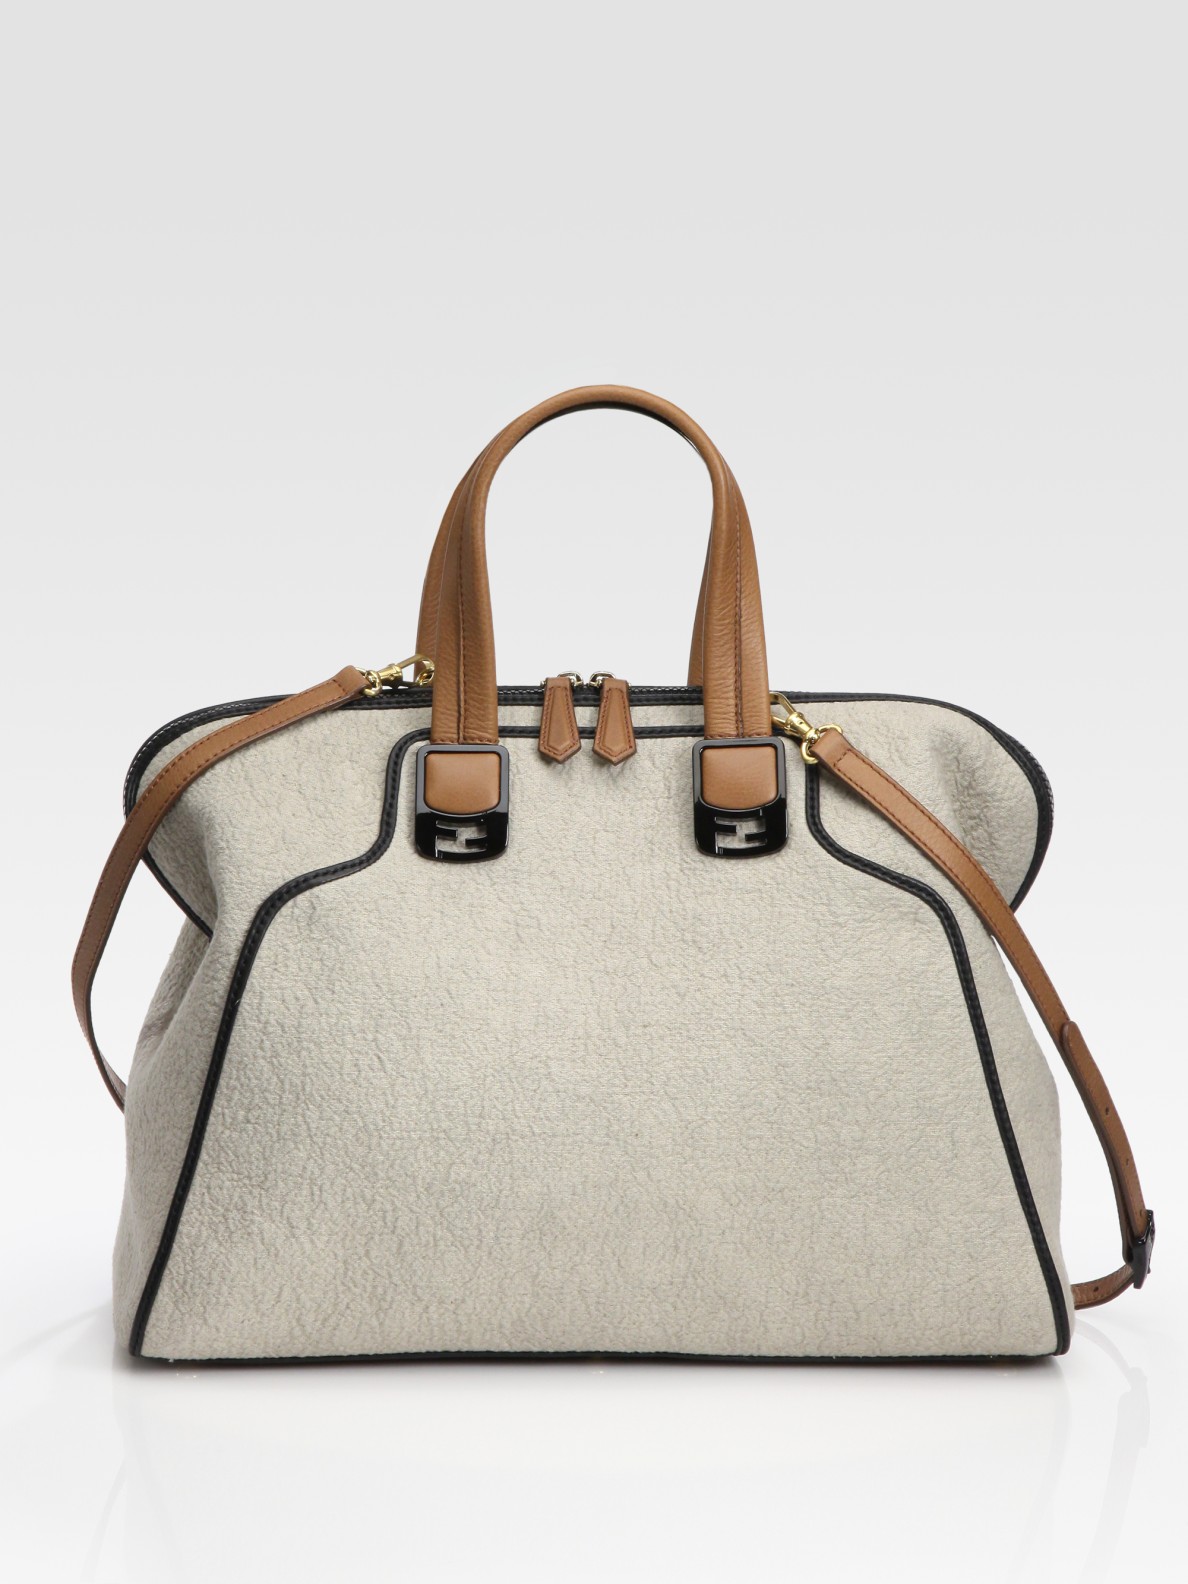 Fendi Chameleon Canvas and Leather Duffle Bag in Beige | Lyst